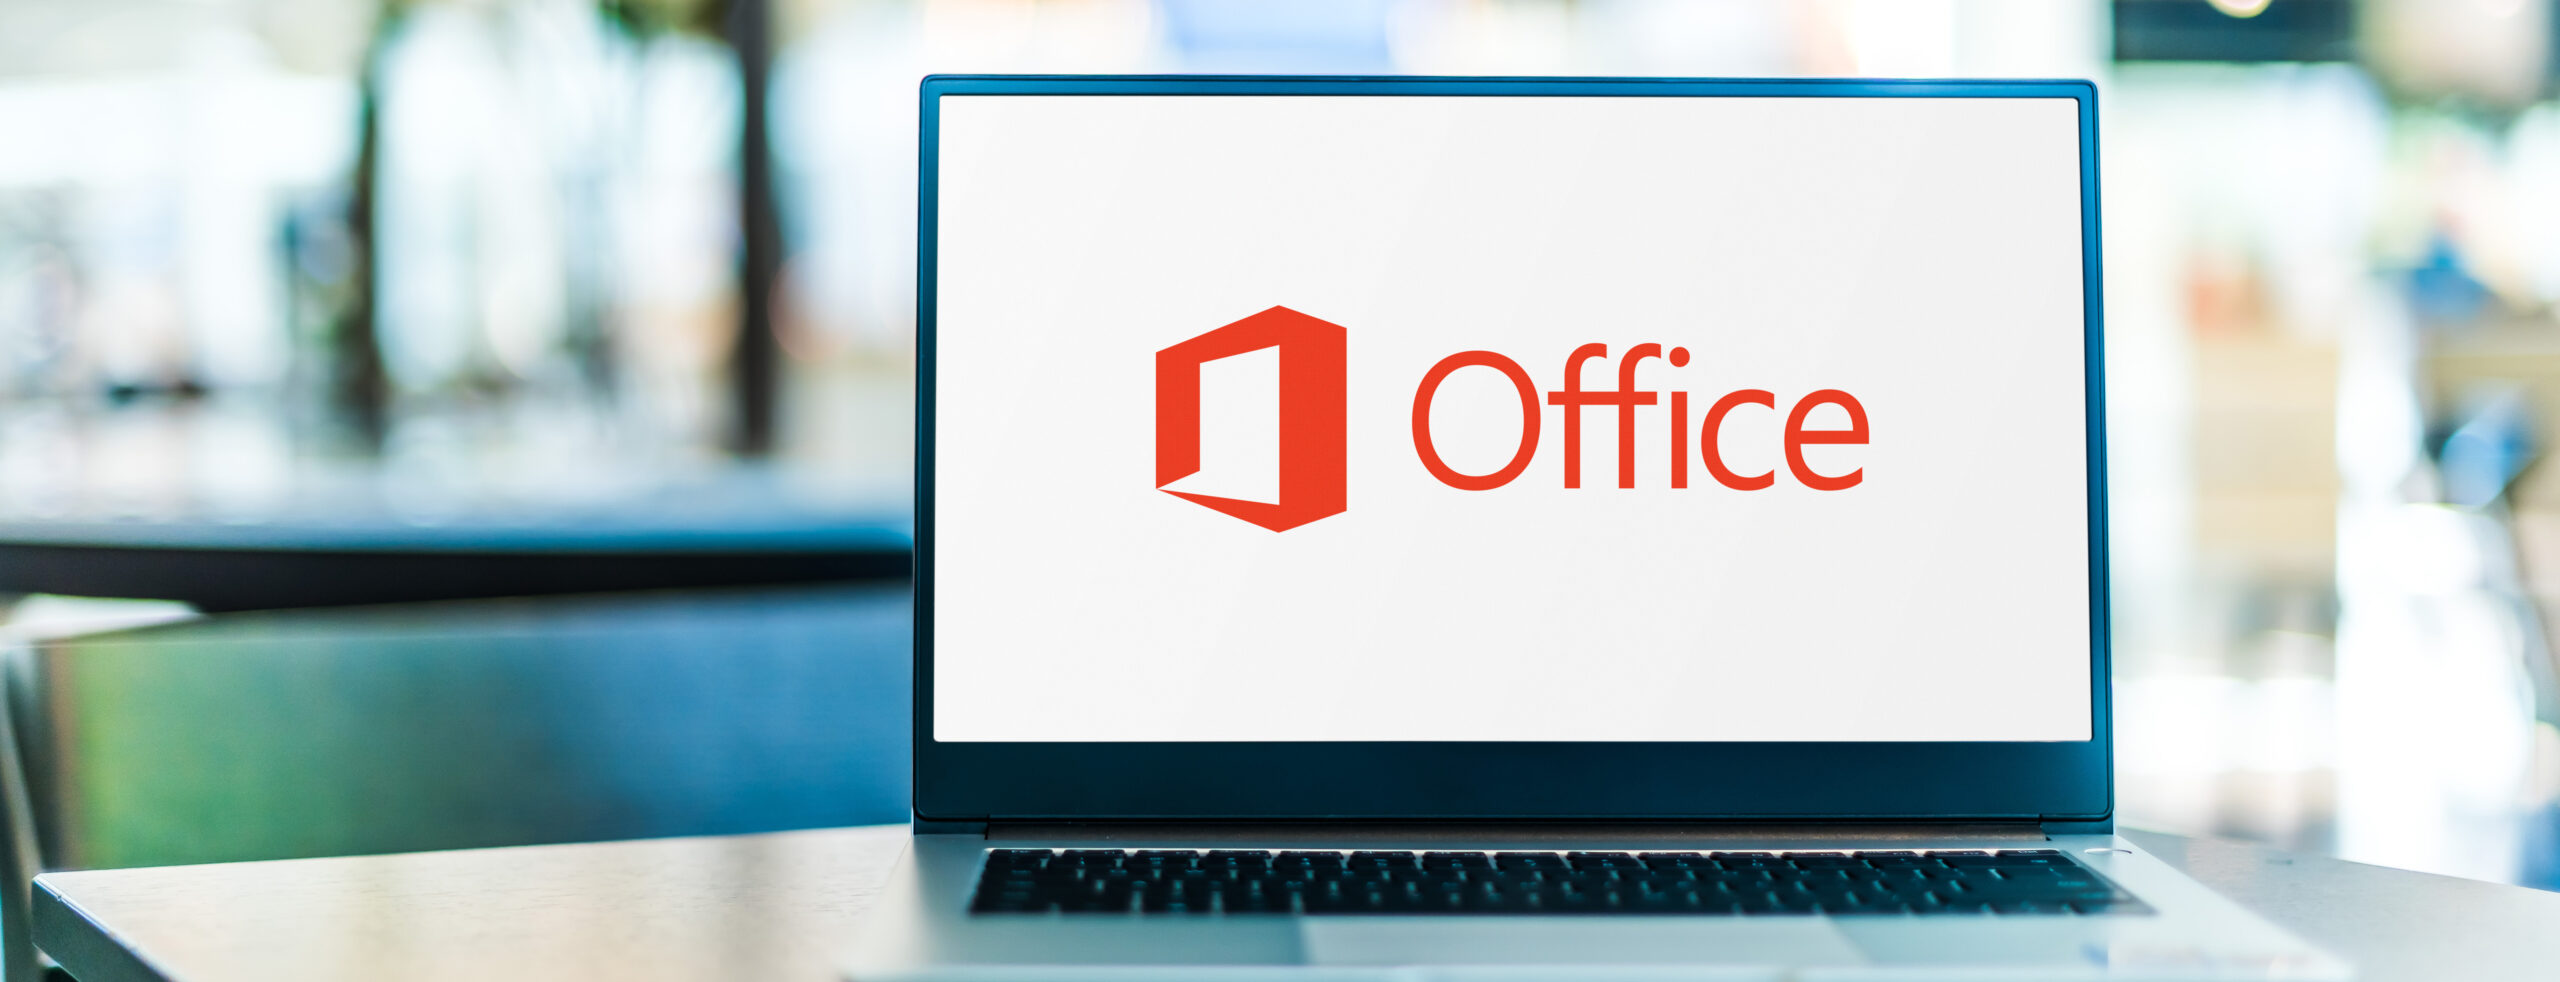 office 365 support 